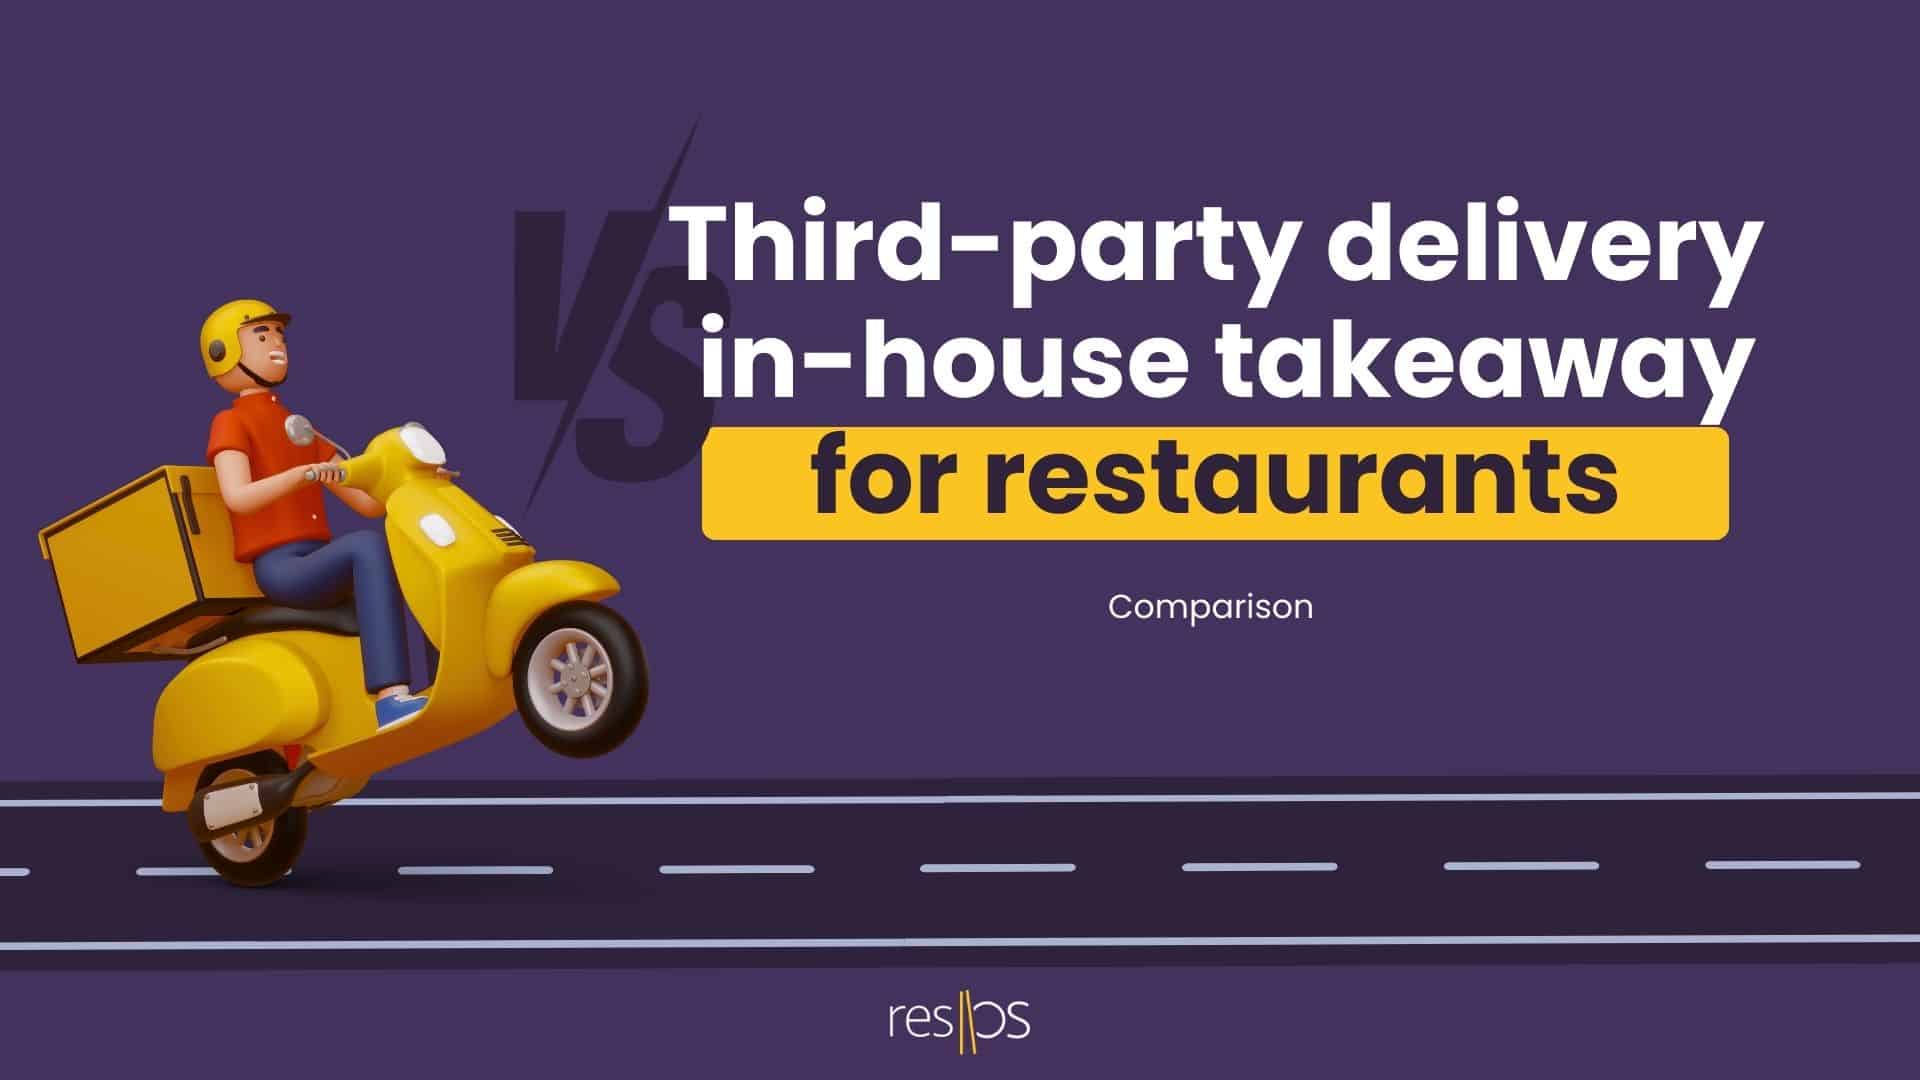 Third-party delivery vs. in-house takeaway services for restaurants